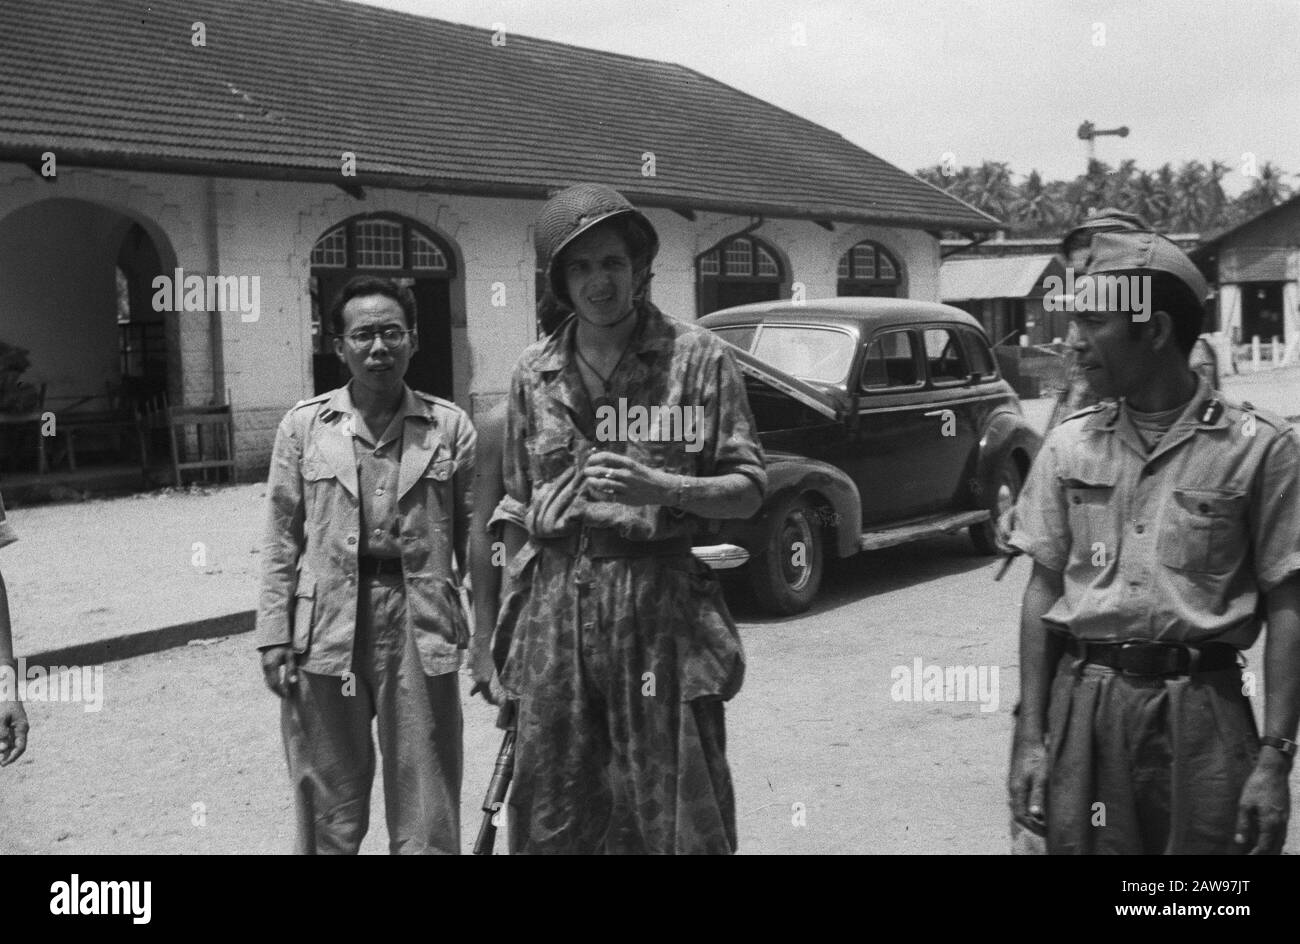 Loeboek Pakem and Baoengan  Get Caught TNI soldiers are applied Date: July 29, 1948 Location: Indonesia, Dutch East Indies, Sumatra Stock Photo